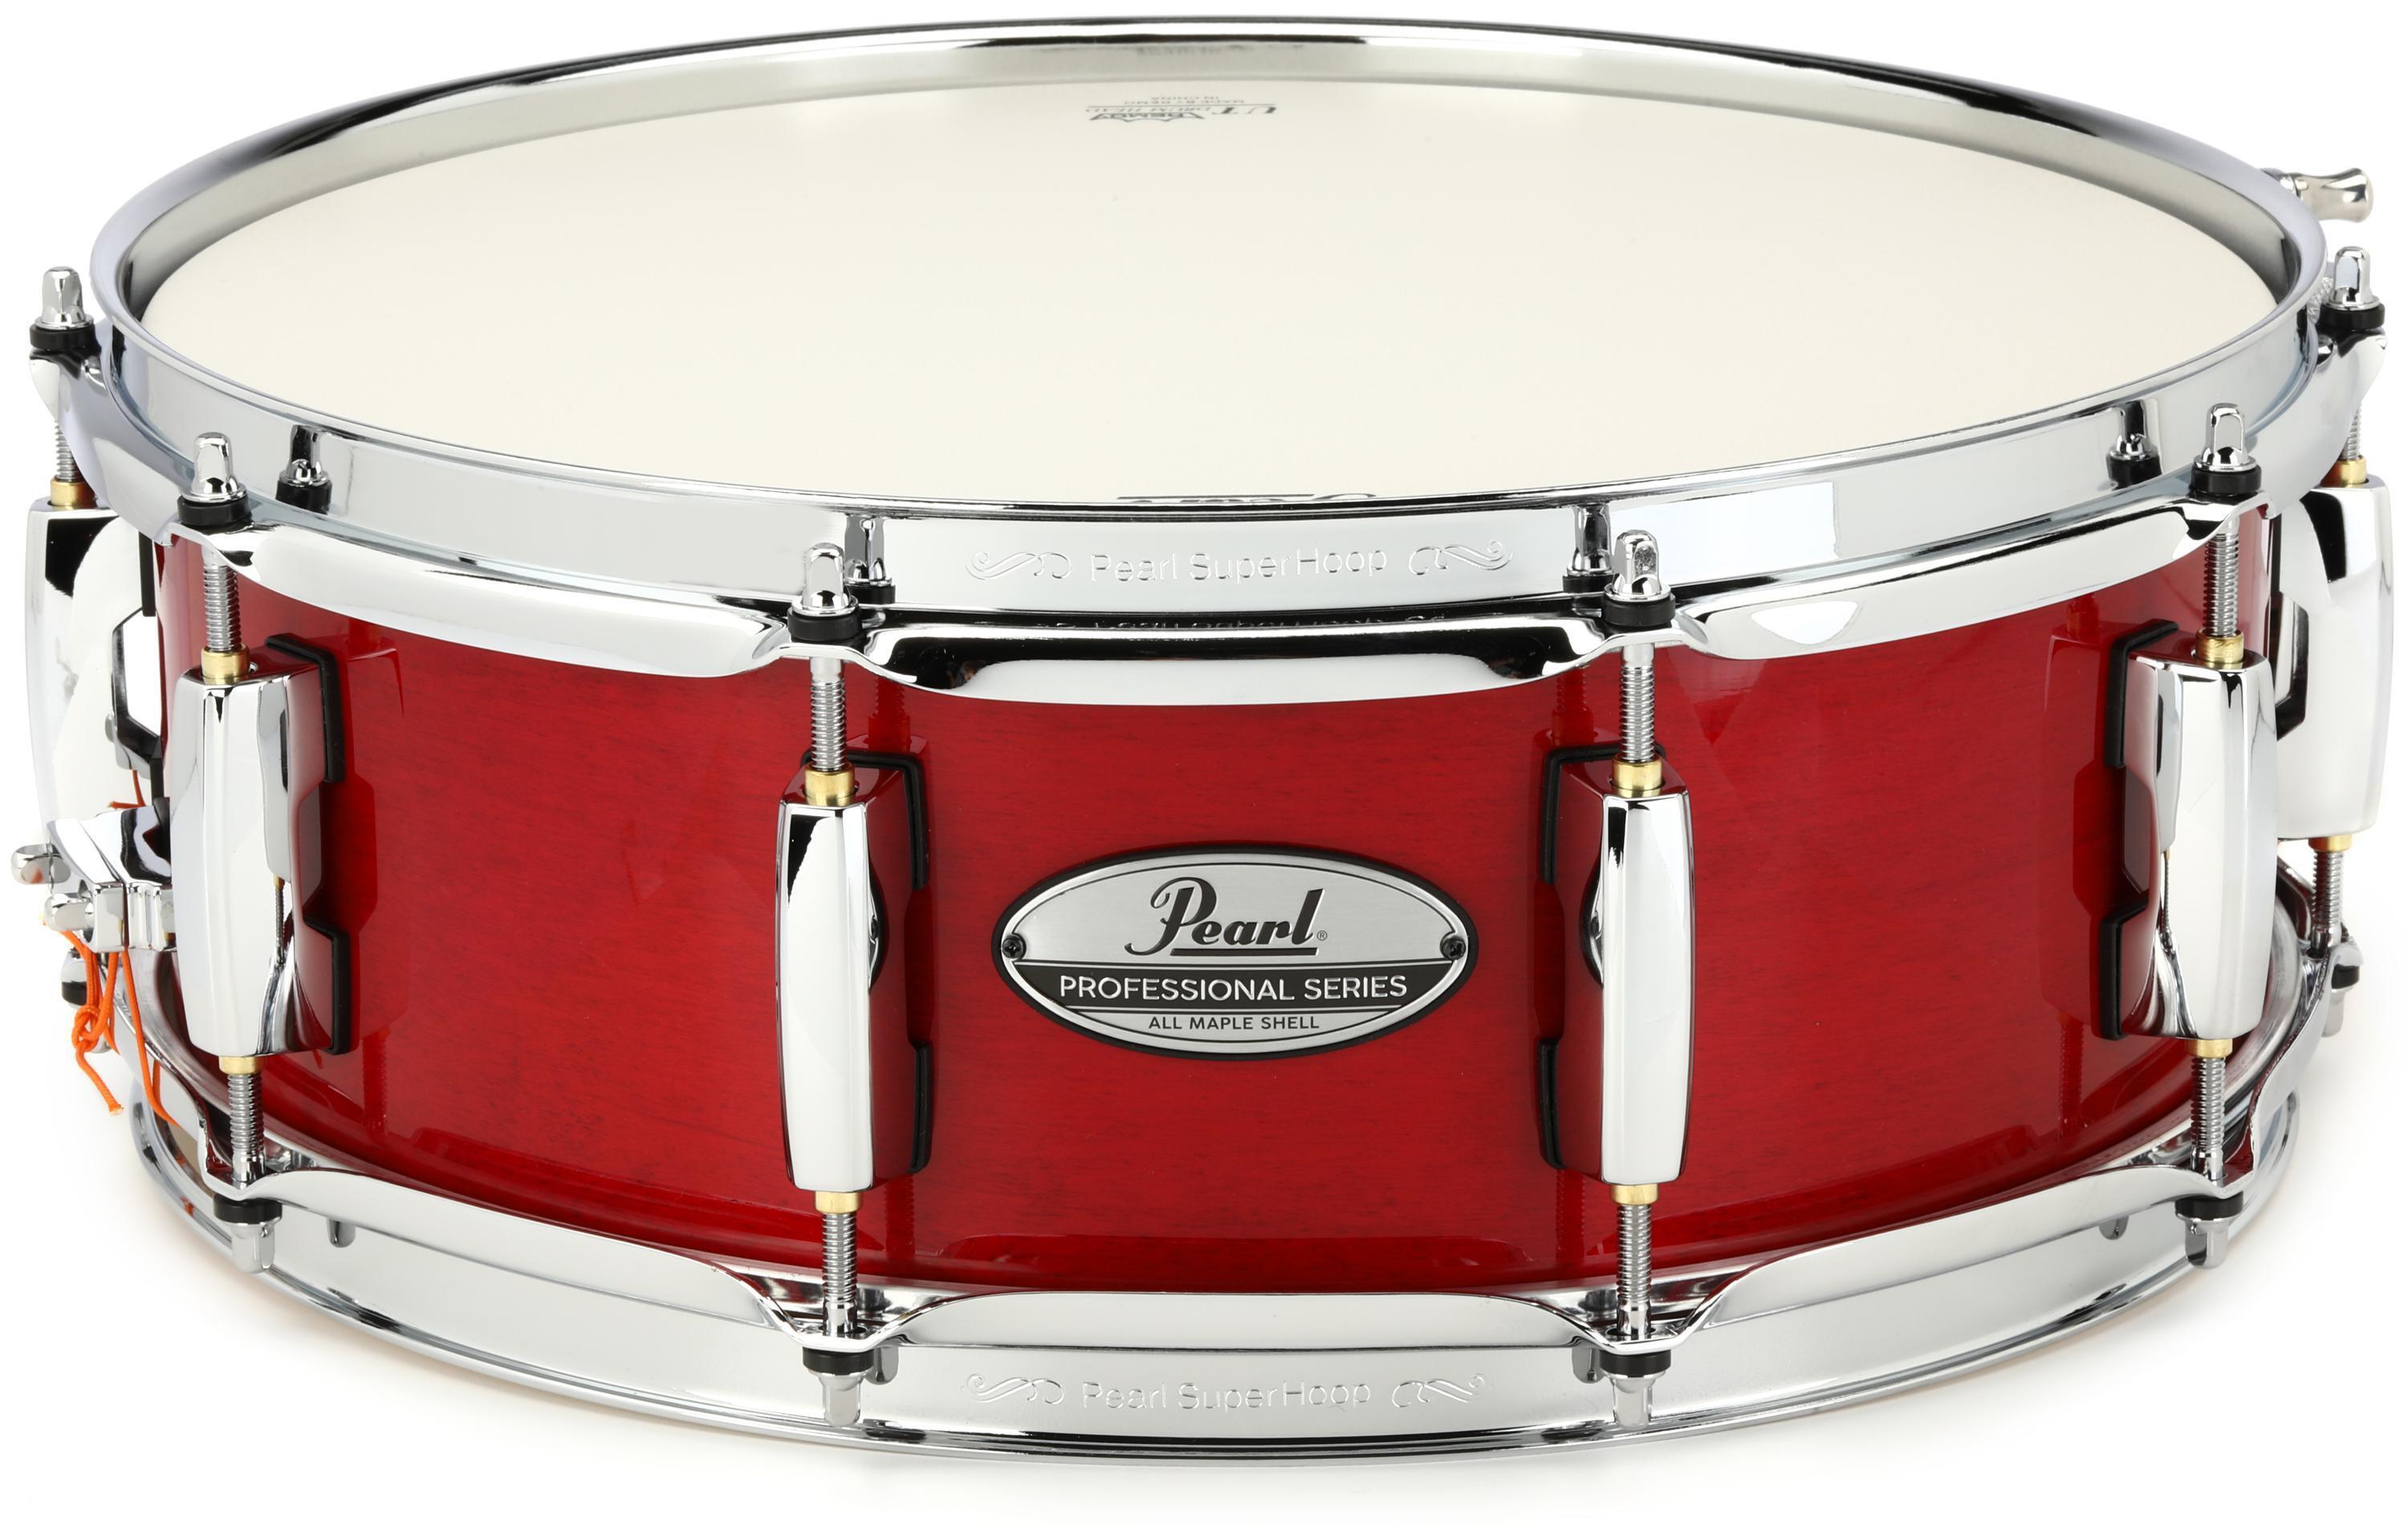 Professional Series Snare Drum - 5 x 14-inch - Sequoia Red